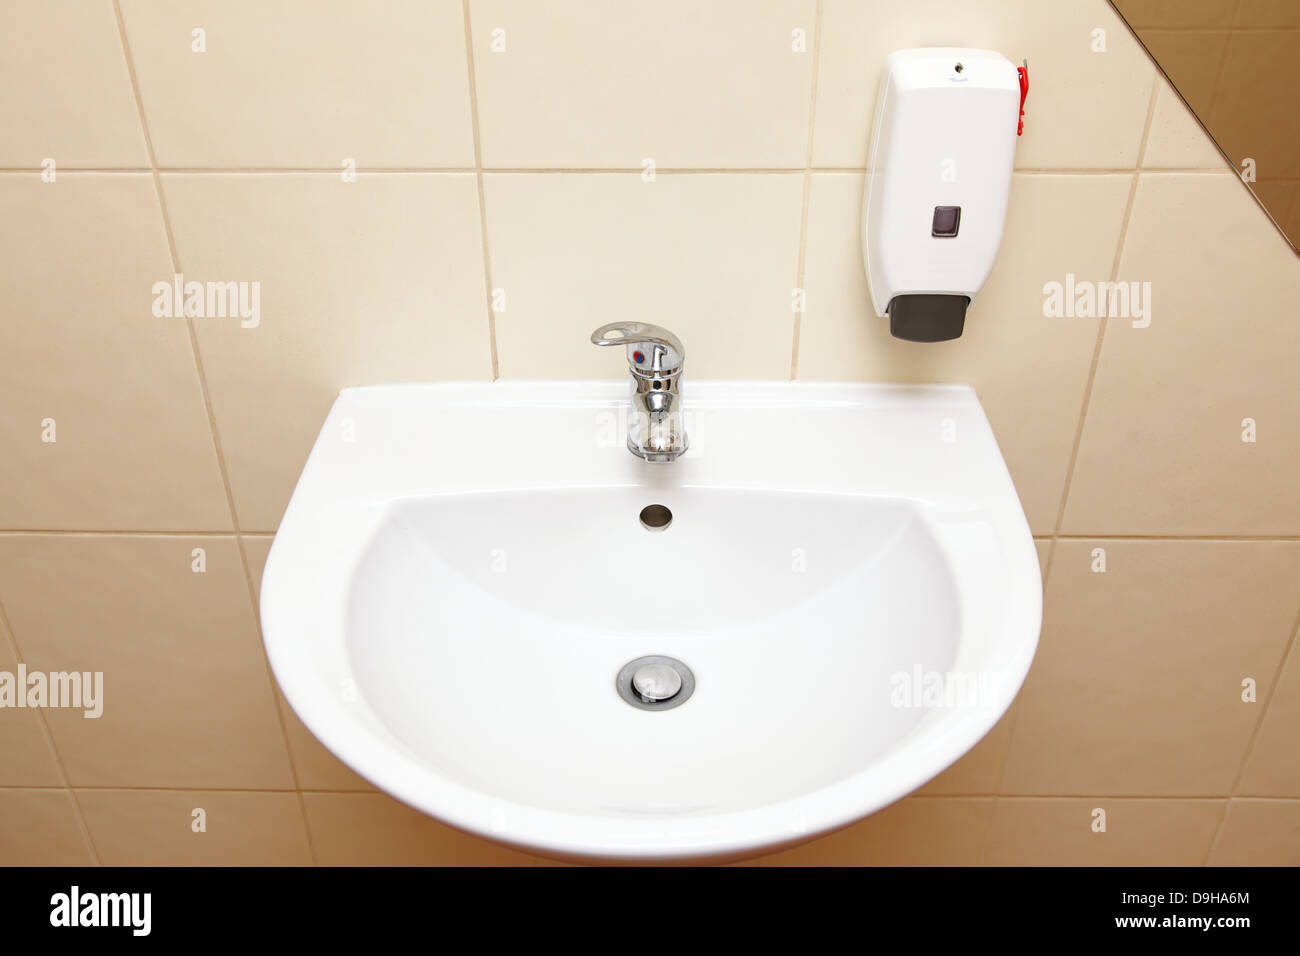 White sink tap and liquid soap in the bathroom Stock Photo